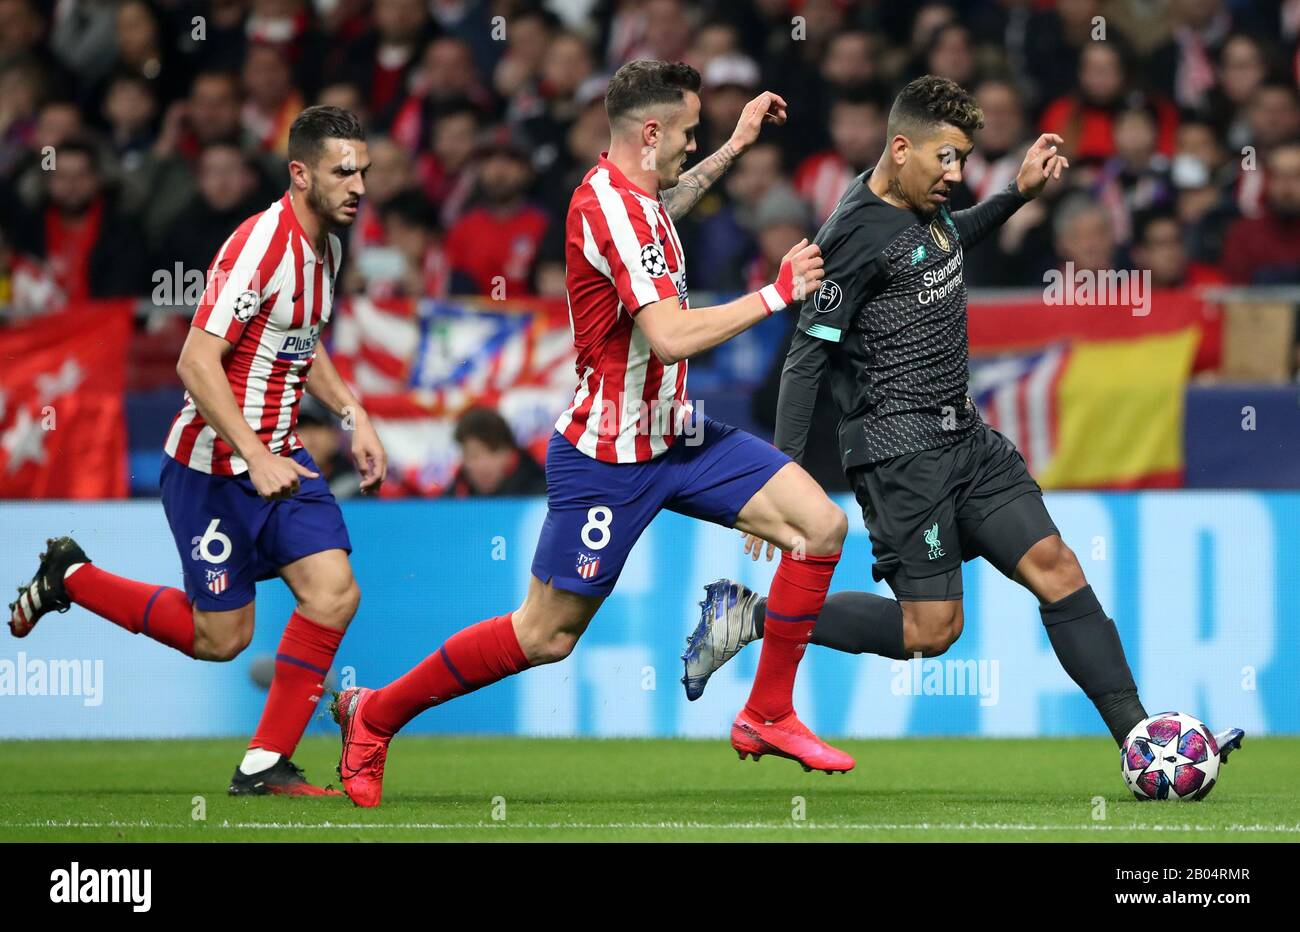 Atletico Madrid's Jorge Koke and Niguez Saul chase Liverpool's Roberto Firmino during the UEFA Champions League round of 16 first leg match at Wanda Metropolitano, Madrid. Stock Photo